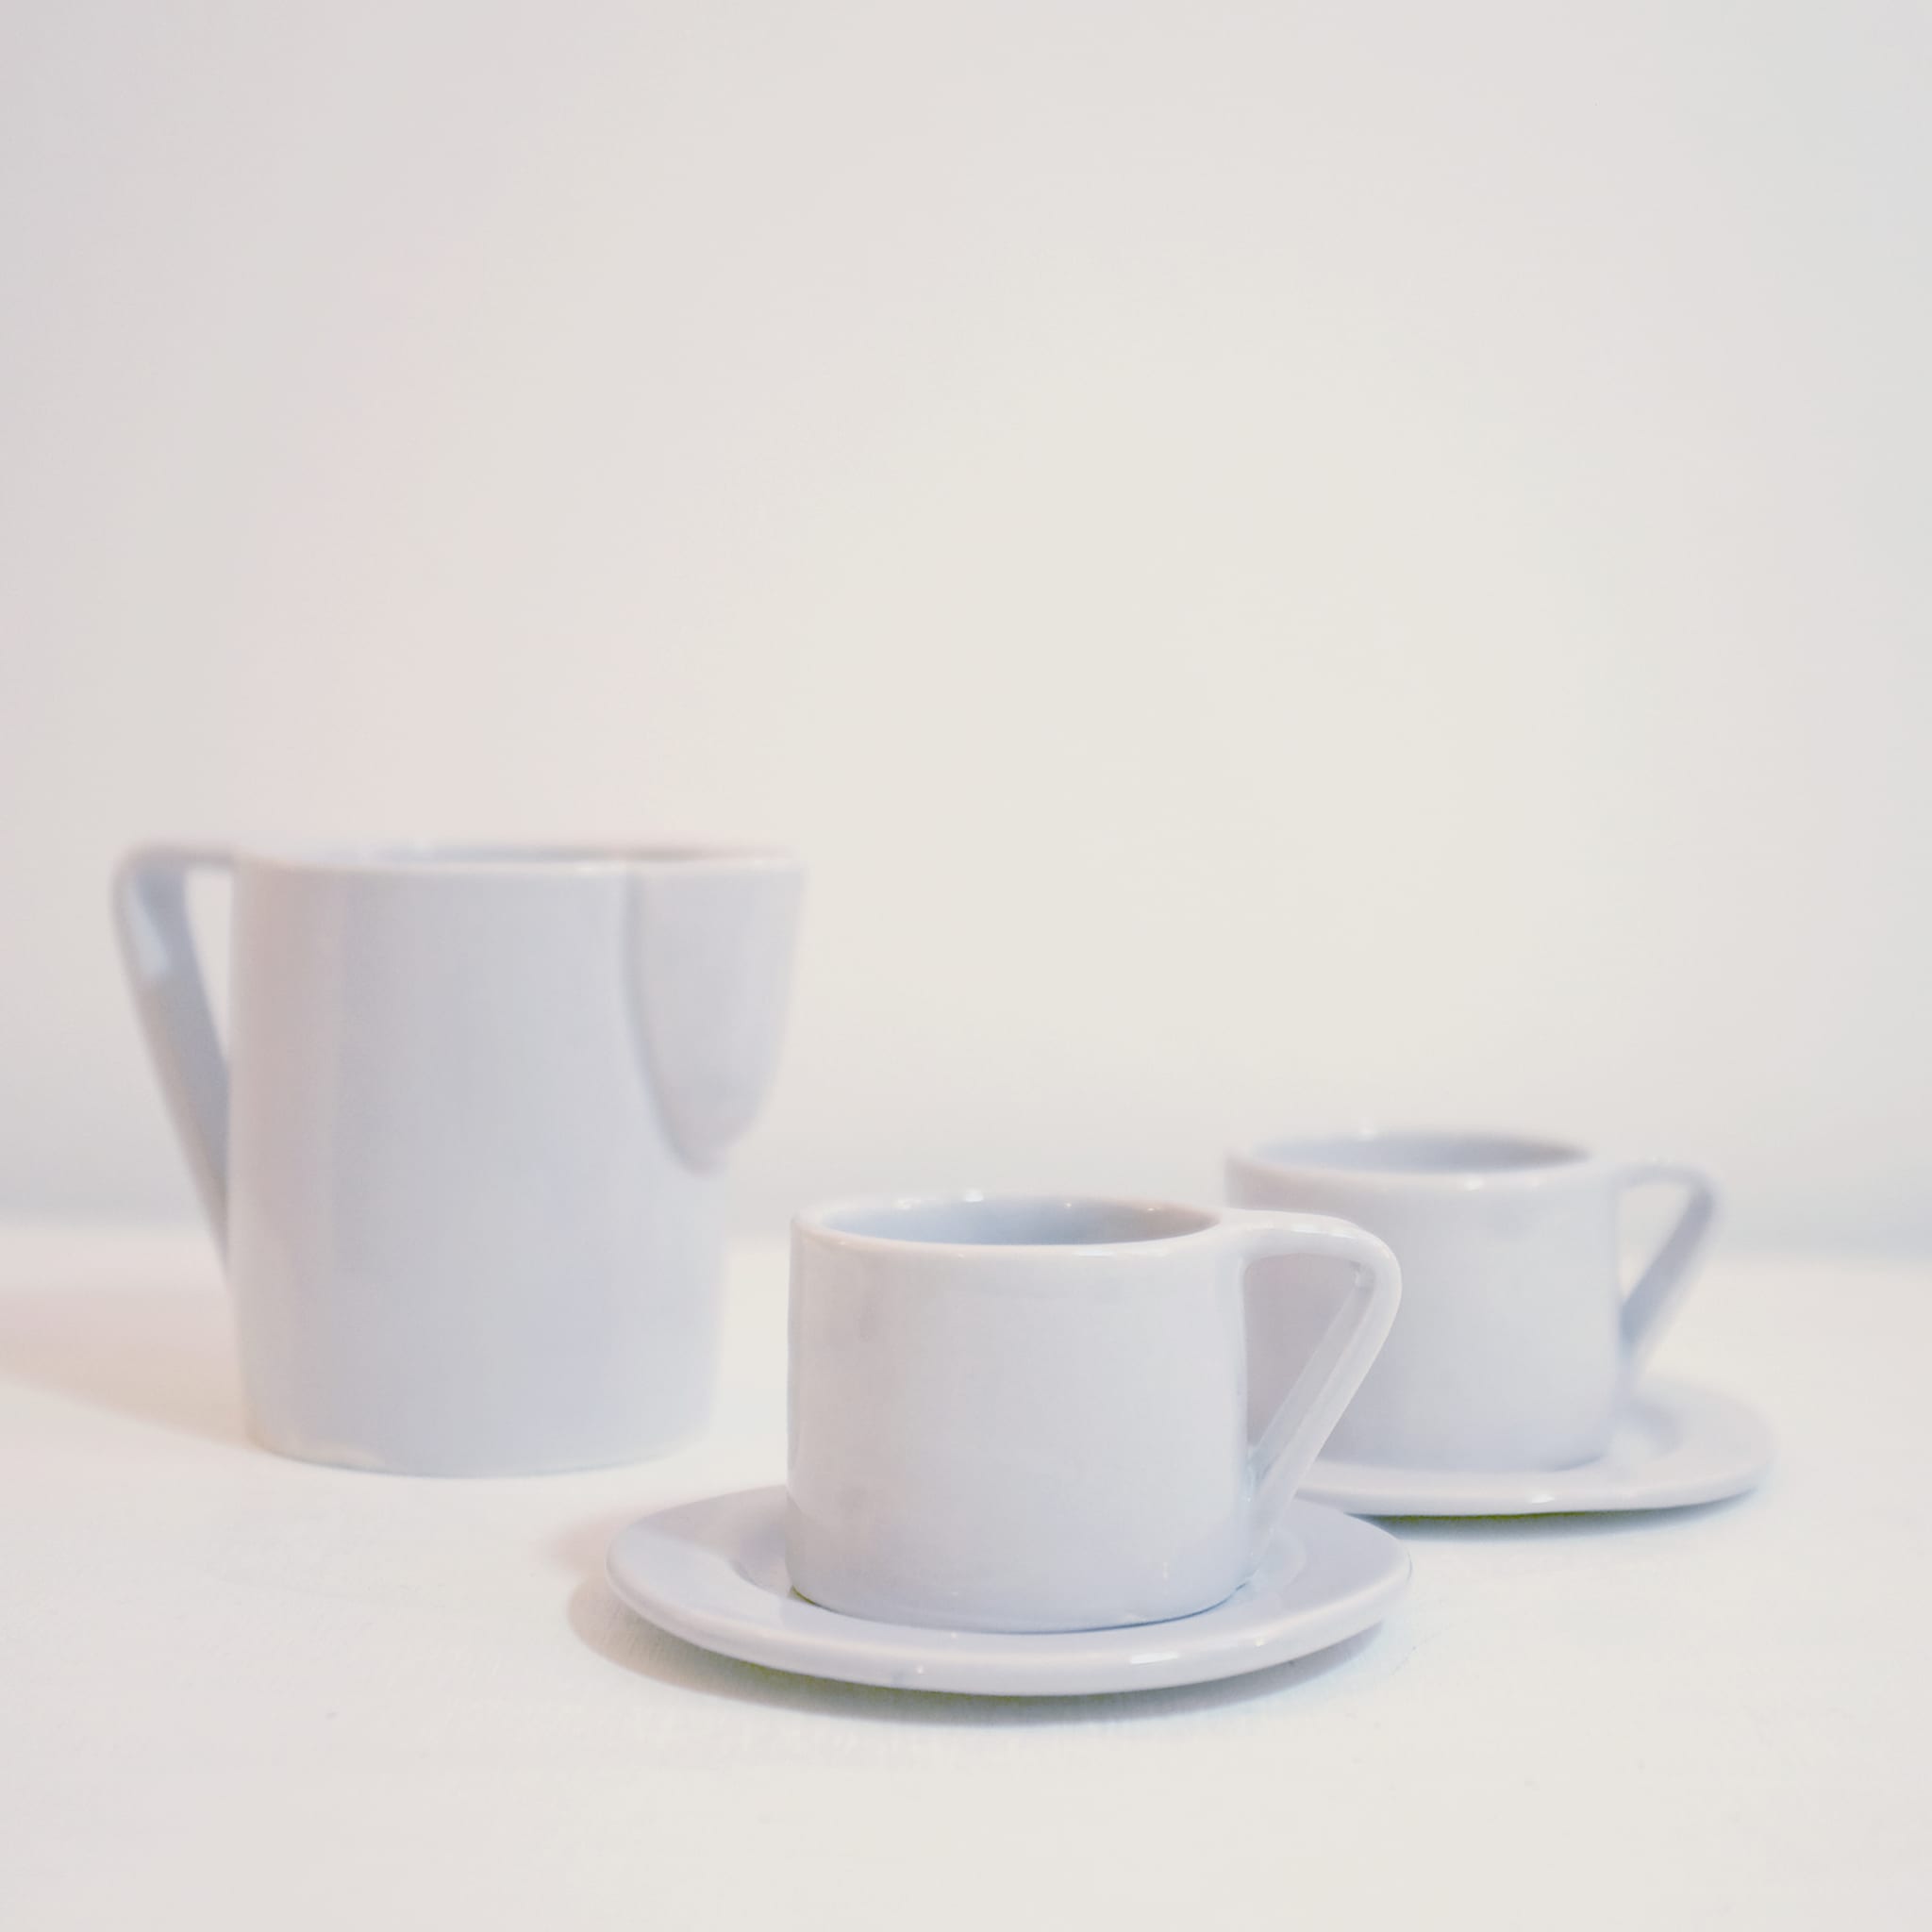 Milano Nebbia Set of 4 Espresso cups and saucers - Alternative view 1